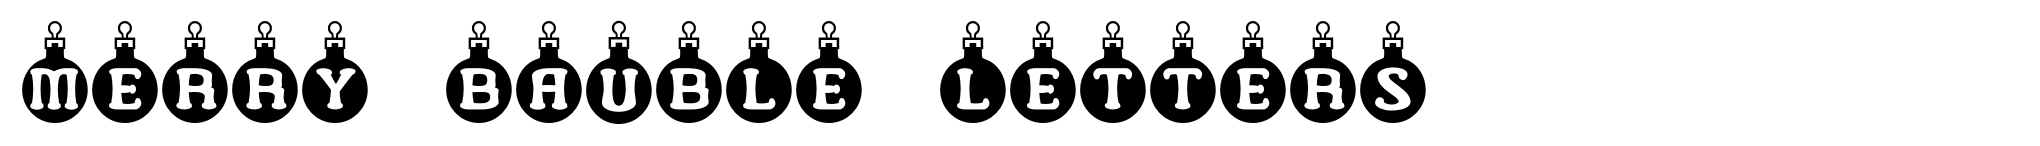 Merry Bauble Letters image